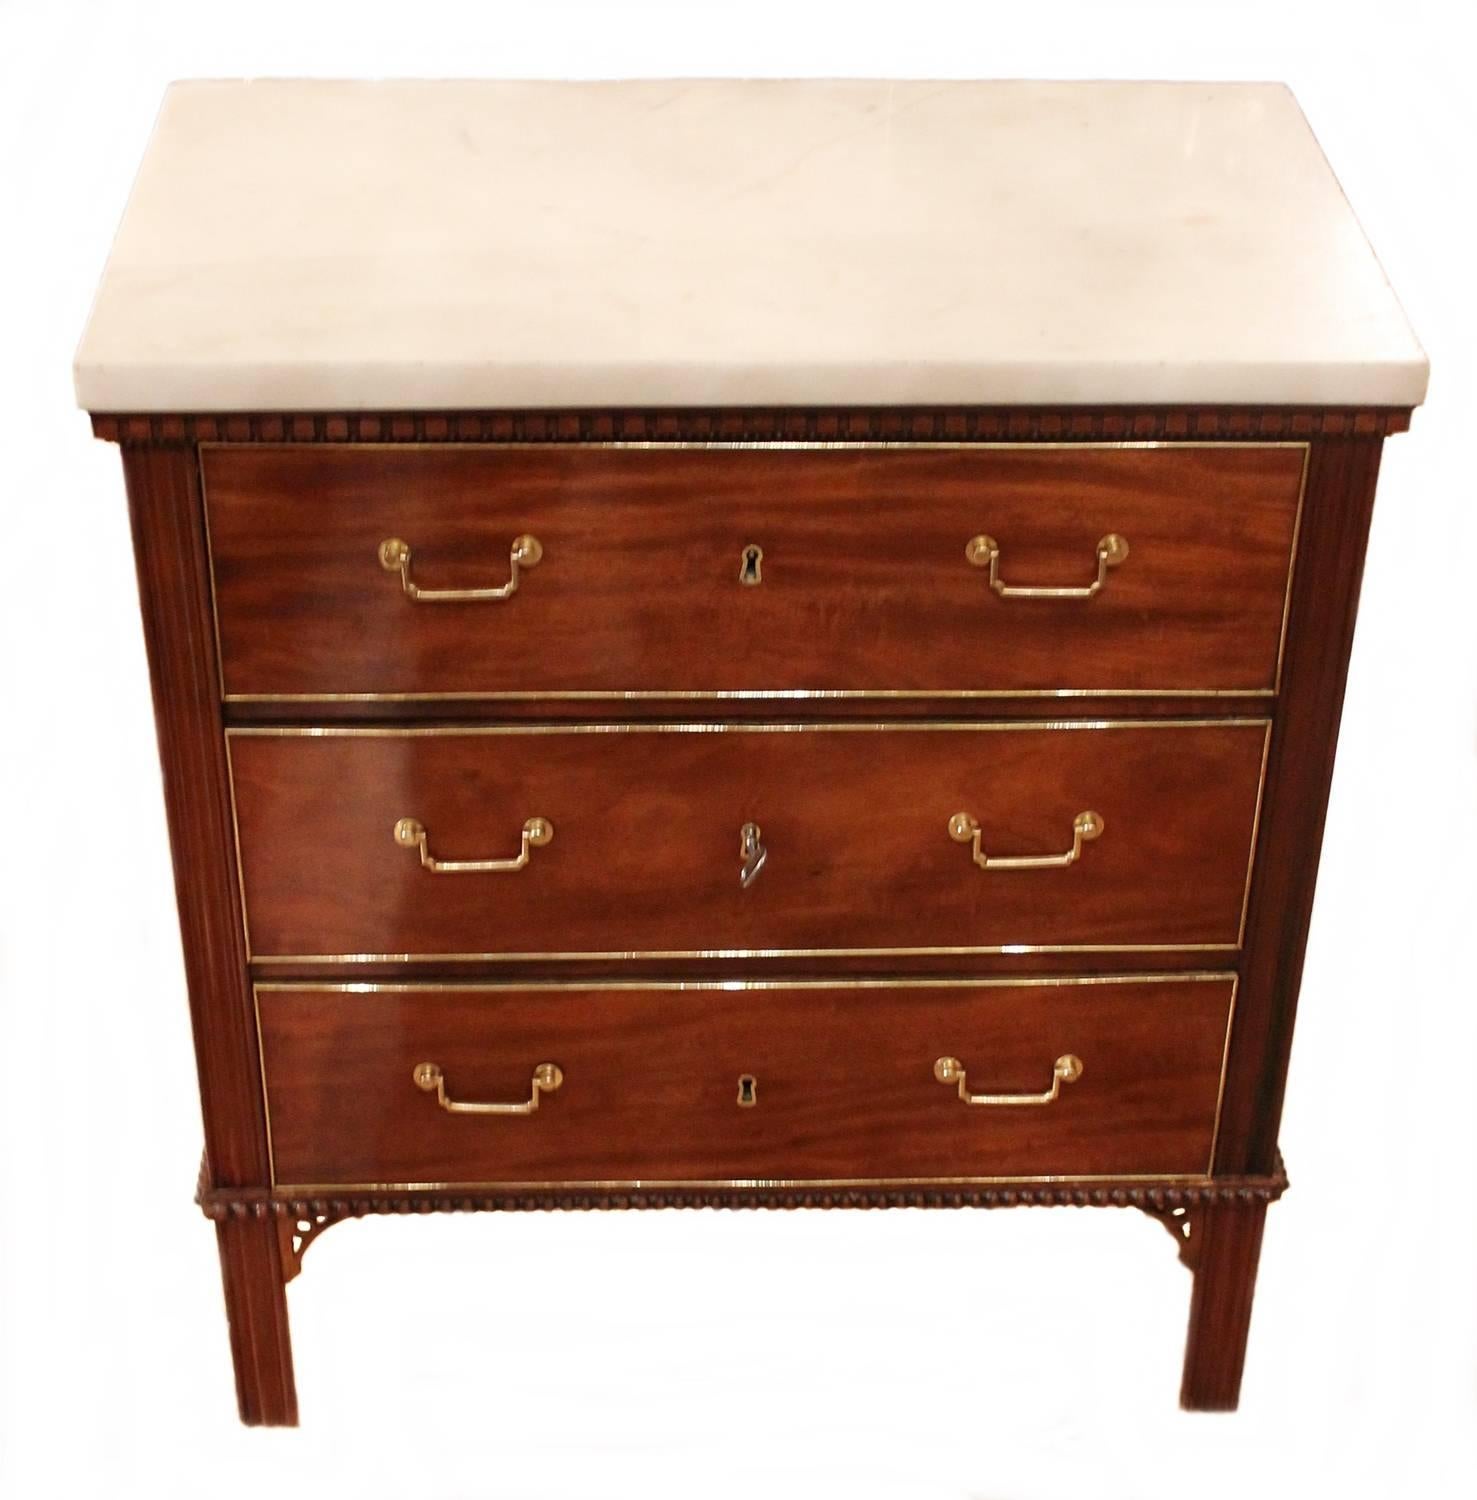 A small and classic Gustavian commode attributed to Gottlieb Iwersson (Master in Stockholm 1778-1813) circa 1795. 
Mahogany veneer, gilt brass and white marble top commode with three drawers and original locks and key. 
The definition of understated